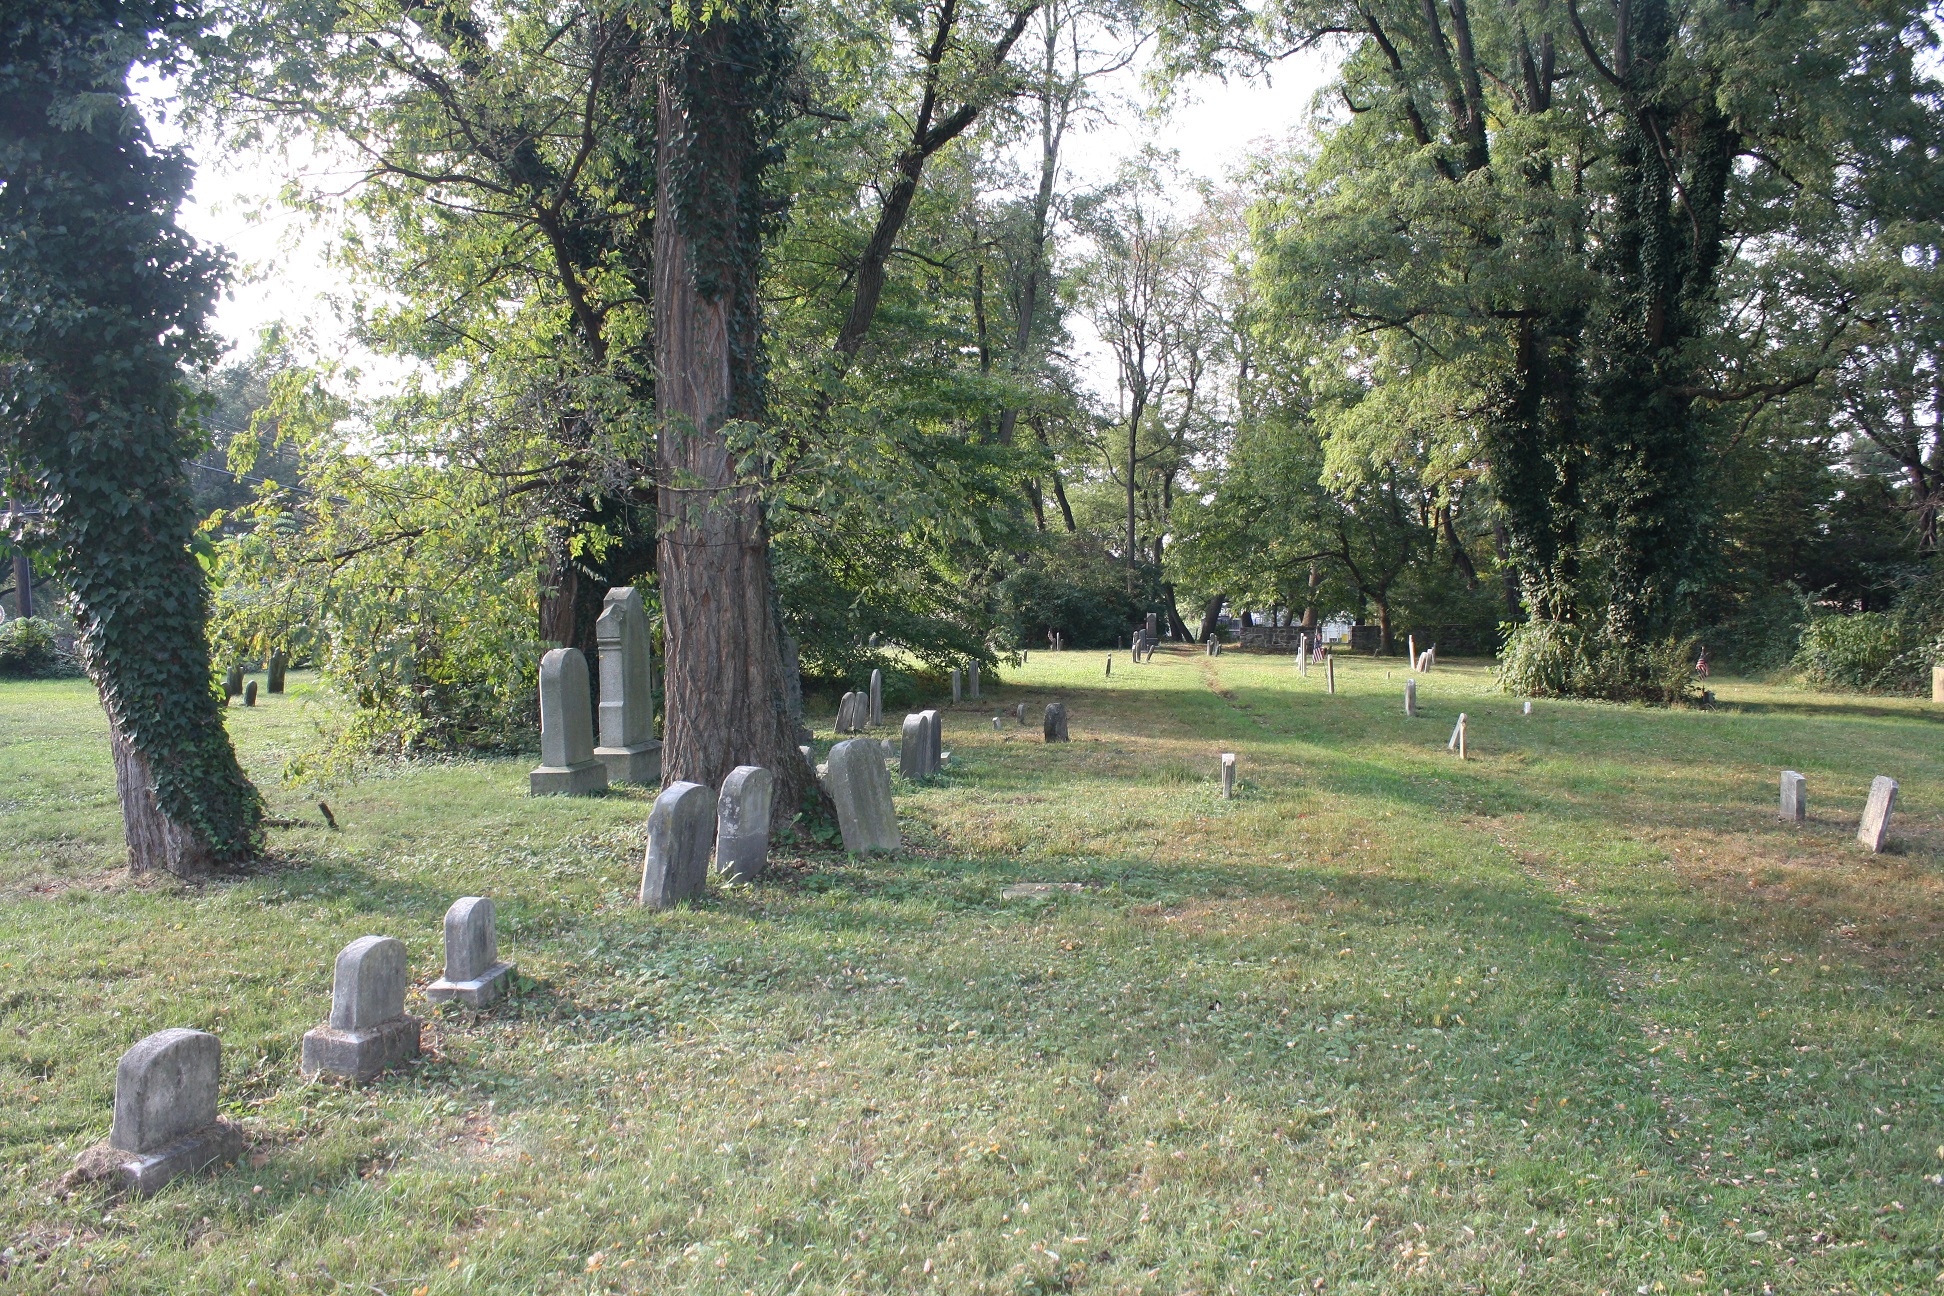 Rows of stone markers in grass with some trees around.